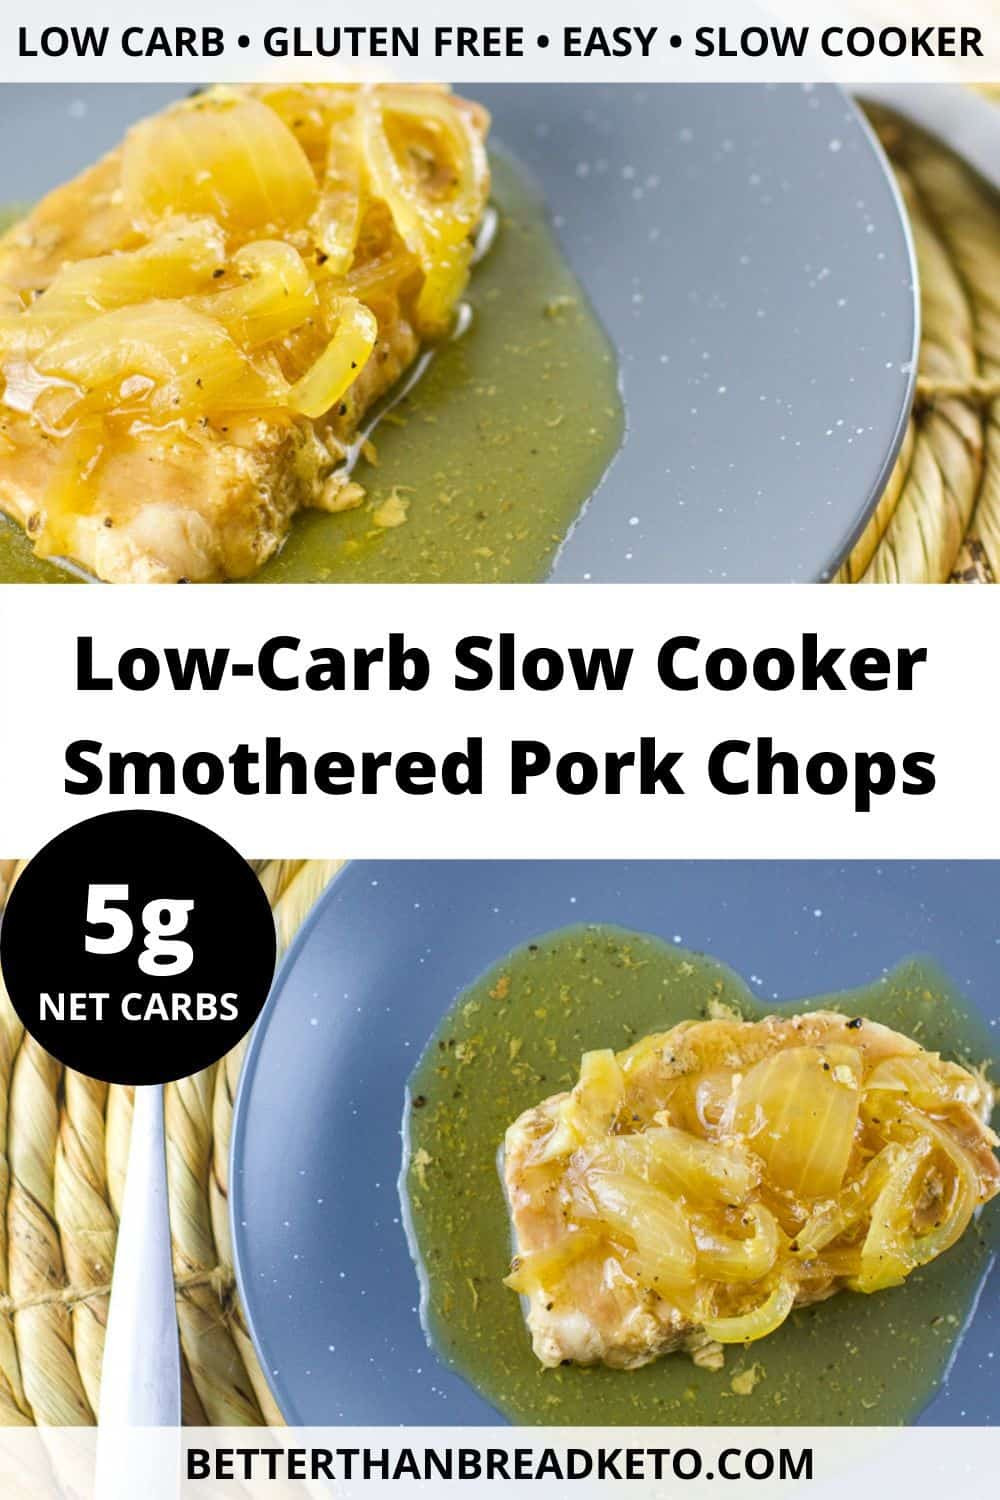 Low Carb Smothered Pork Chops
 Low Carb Slow Cooker Smothered Pork Chops